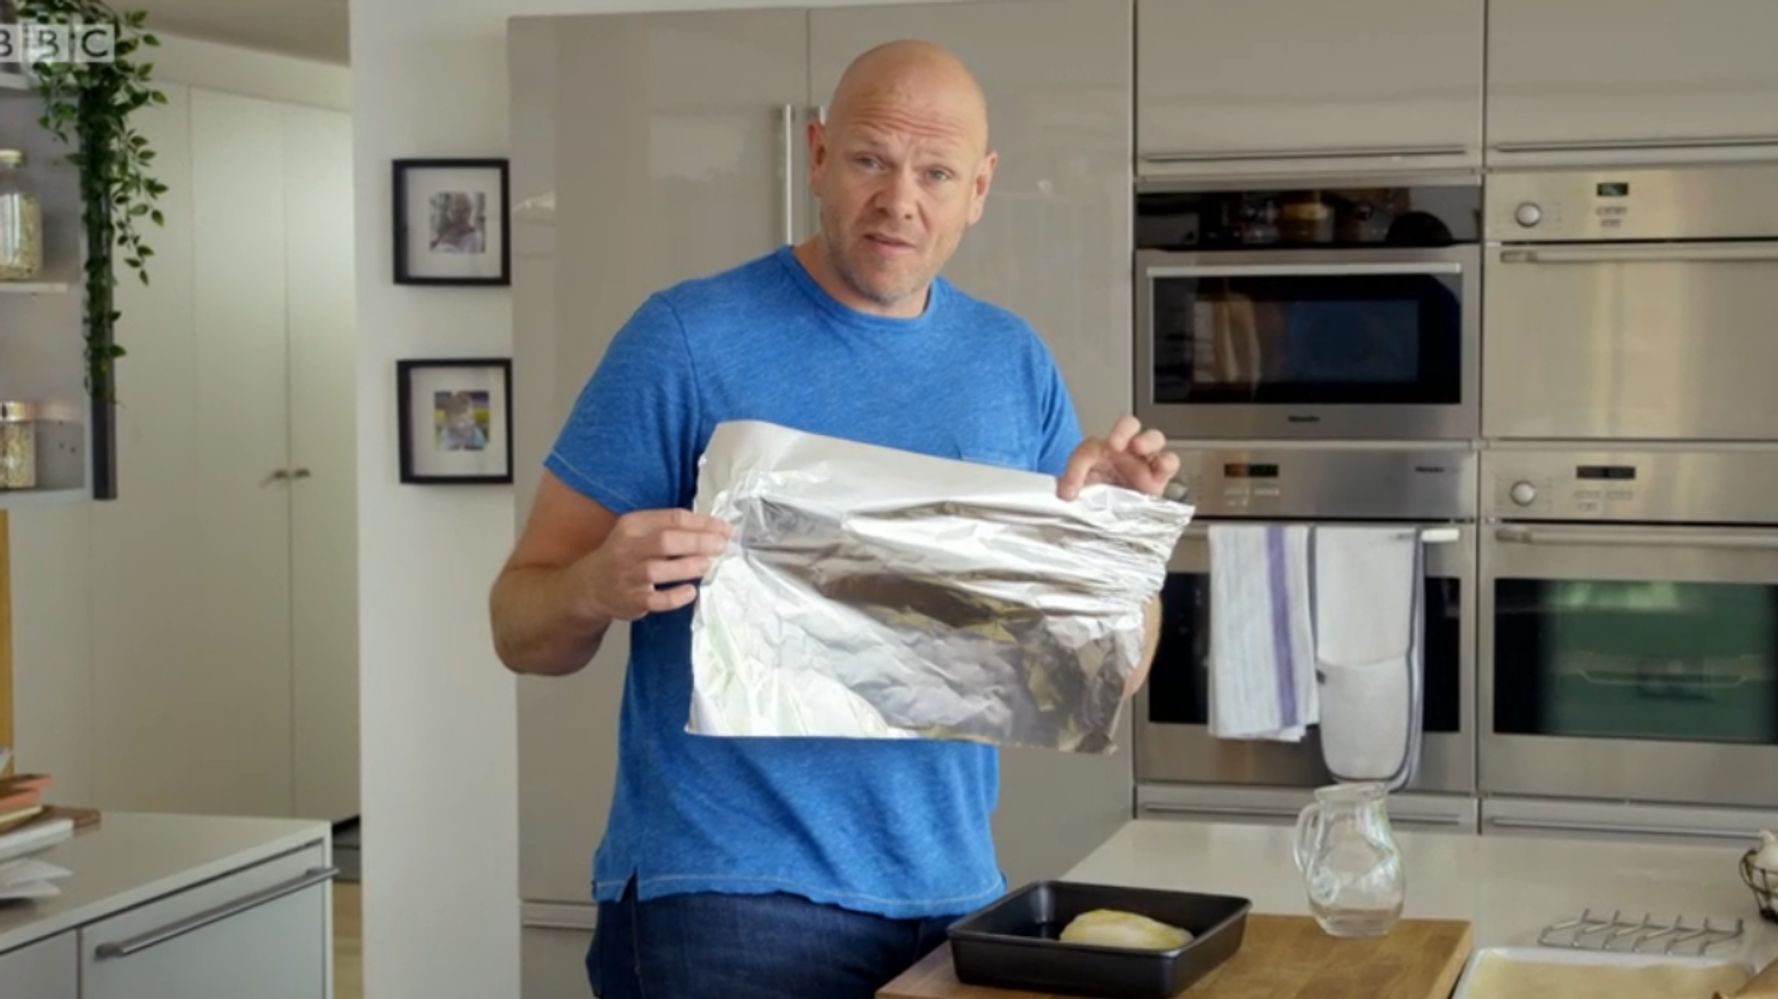 Why aluminum foil is shiny on one side